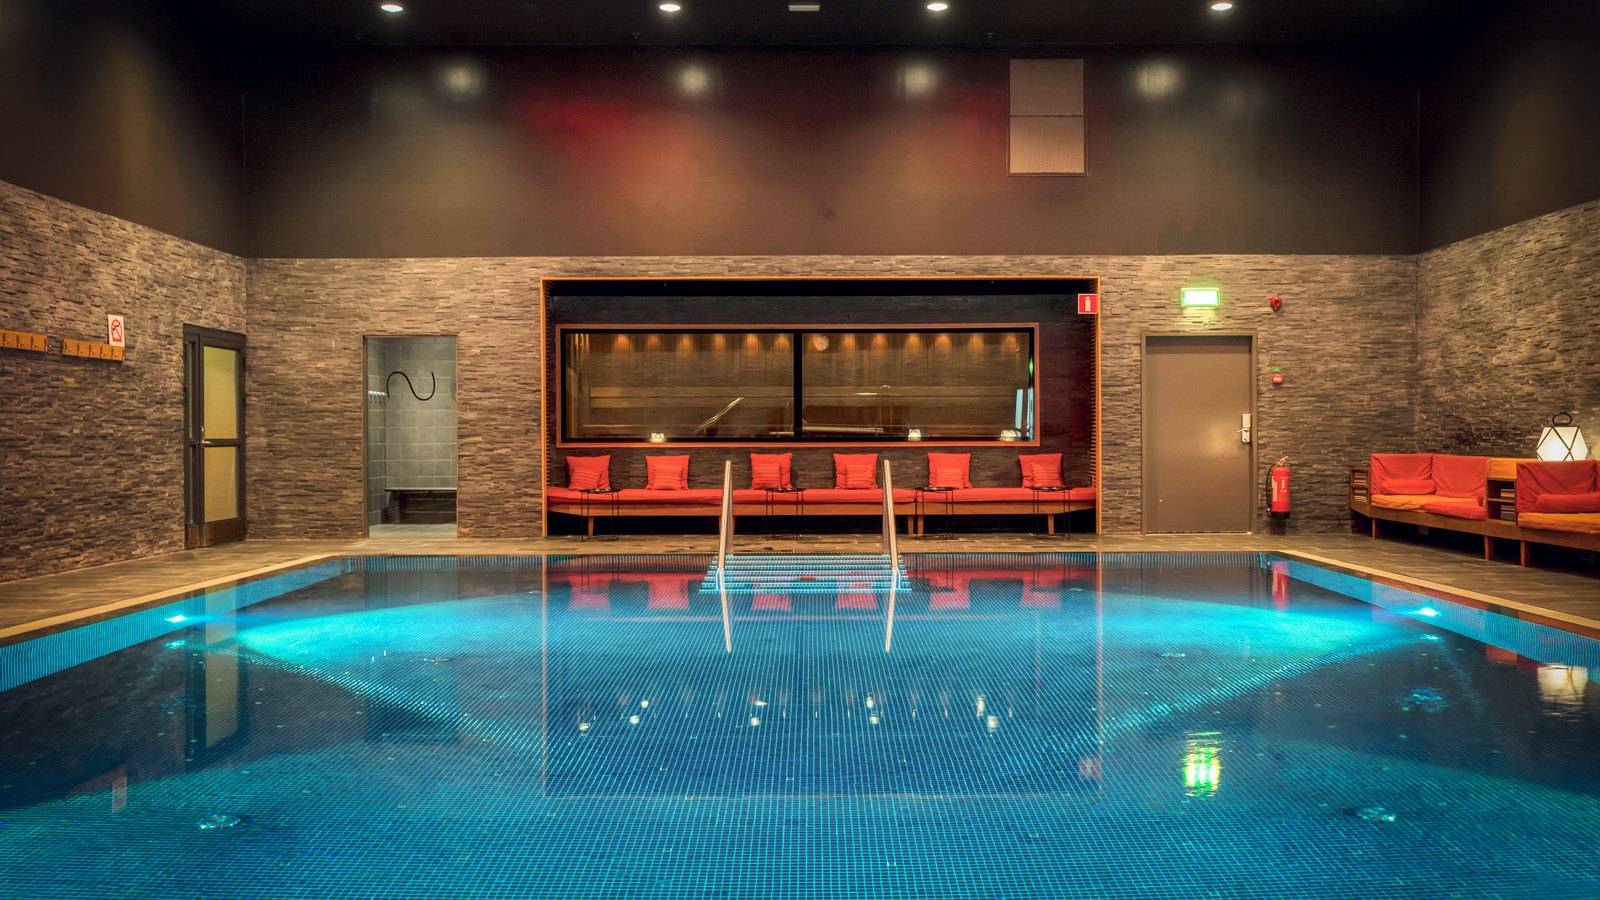 Indoor pool at a spa